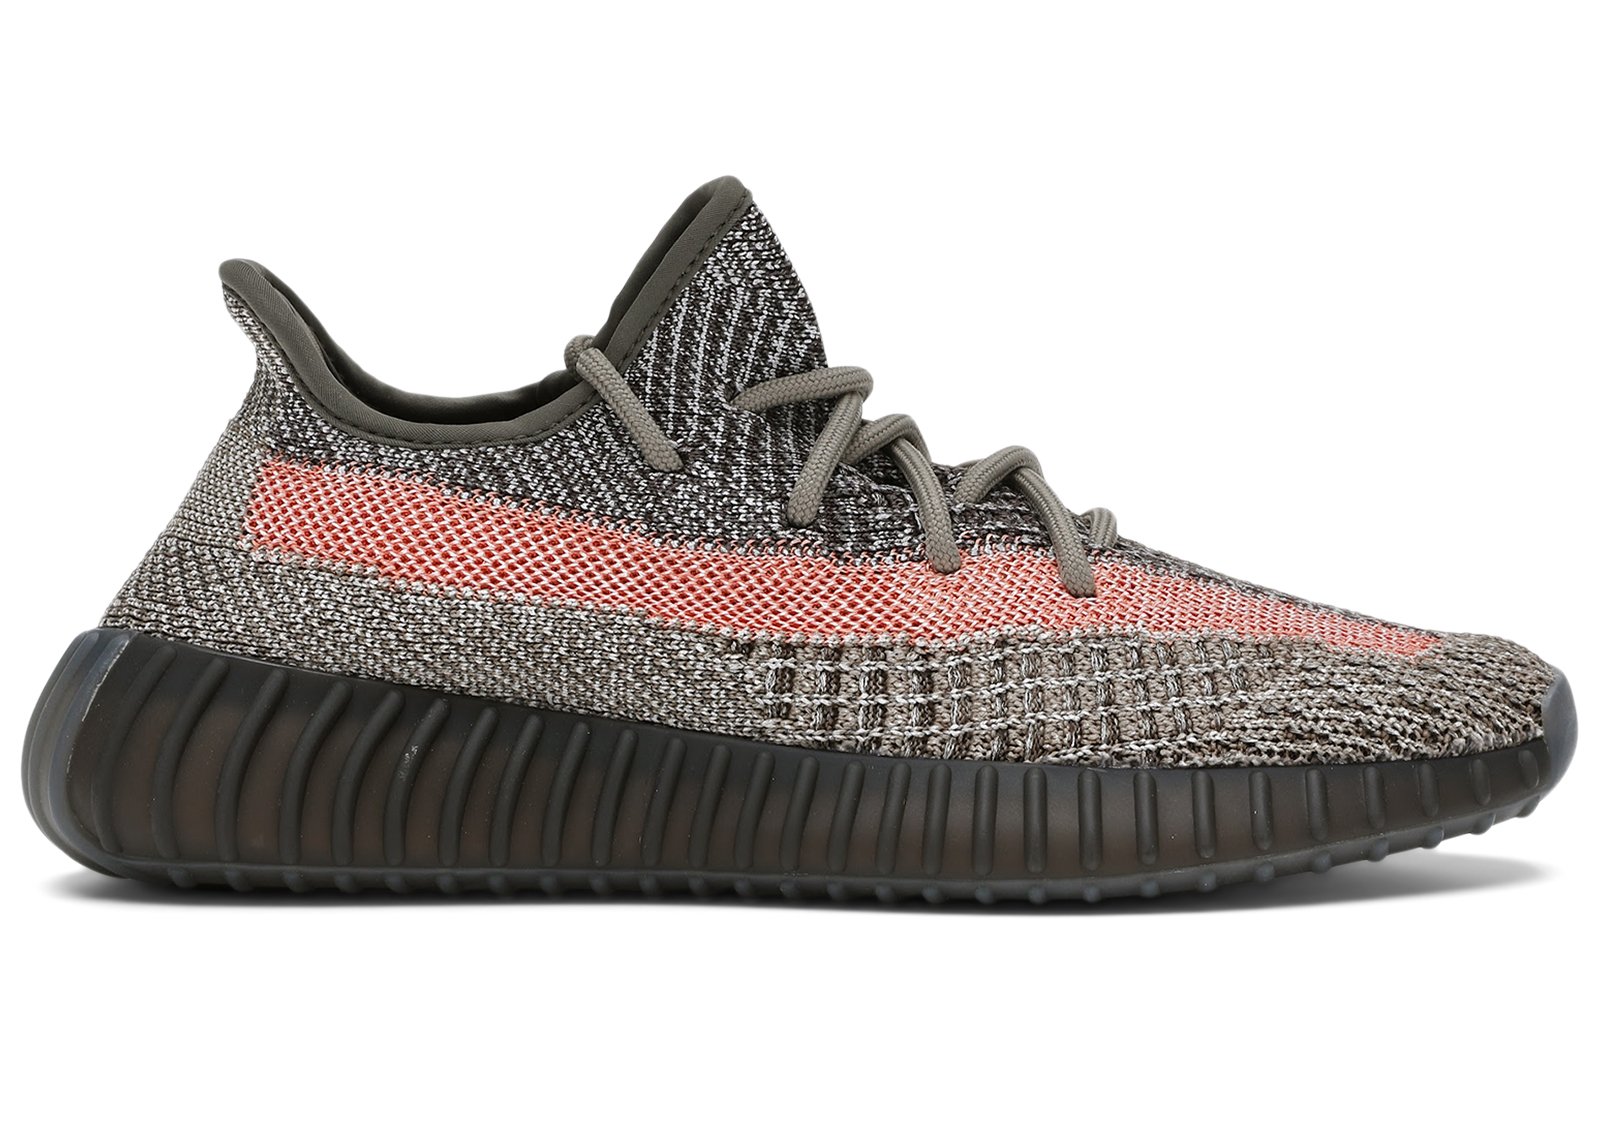 adidas Yeezy Boost 350 V2 Ash Stone sneakers